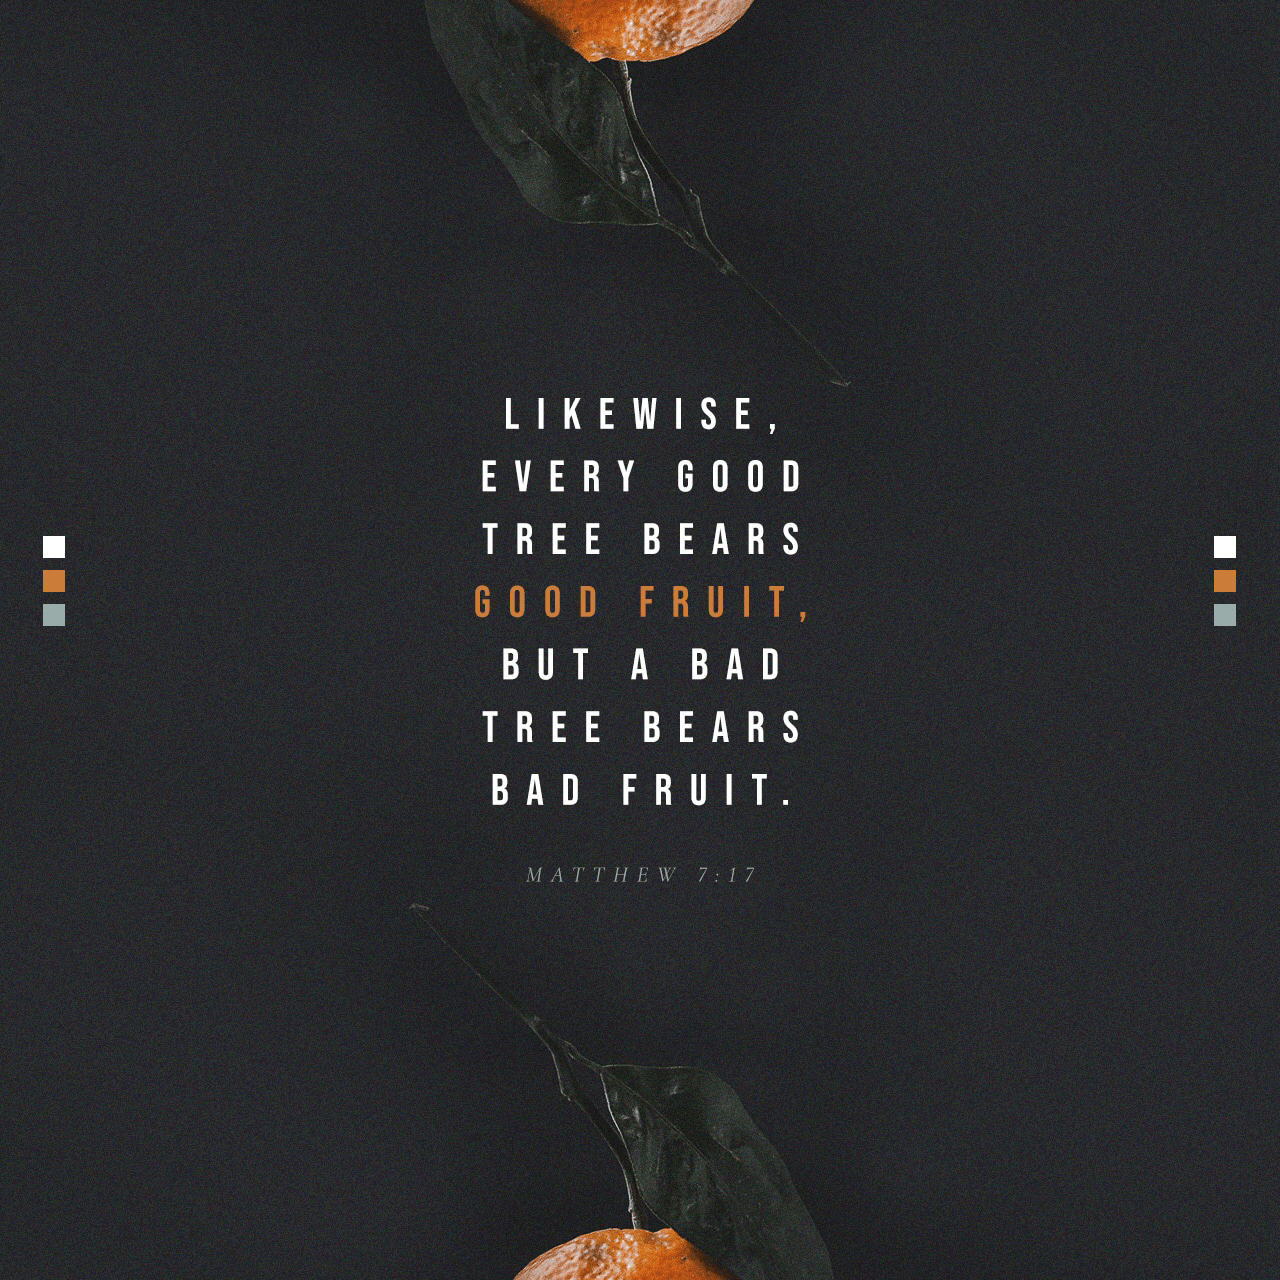 VOTD October 24 - “So every good tree bears good fruit, but the bad tree bears bad fruit. A good tree cannot produce bad fruit, nor can a bad tree produce good fruit. Every tree that does not bear good fruit is cut down and thrown into the fire. So then, you will know them by their fruits.” Matthew 7:17-20 NASB